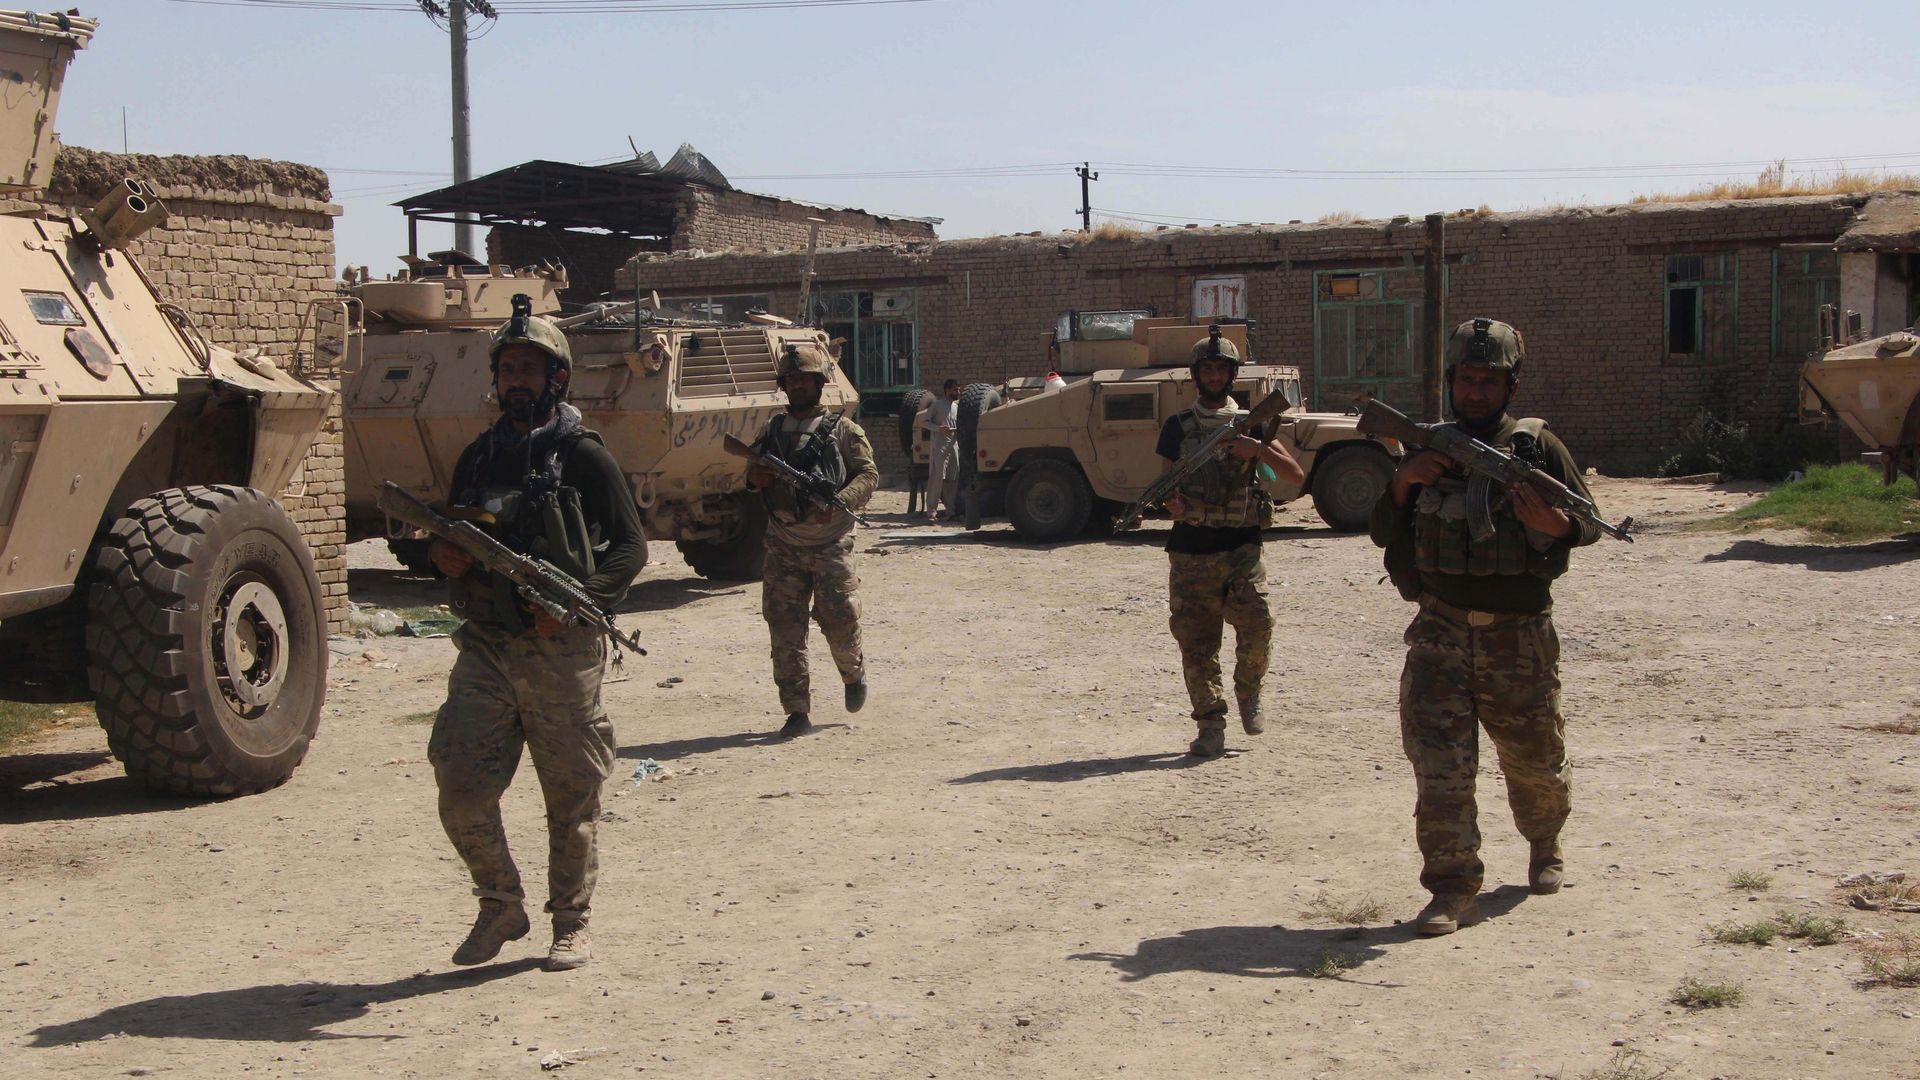 Afghan soldiers in a village, holding rifles and dressed in military gear